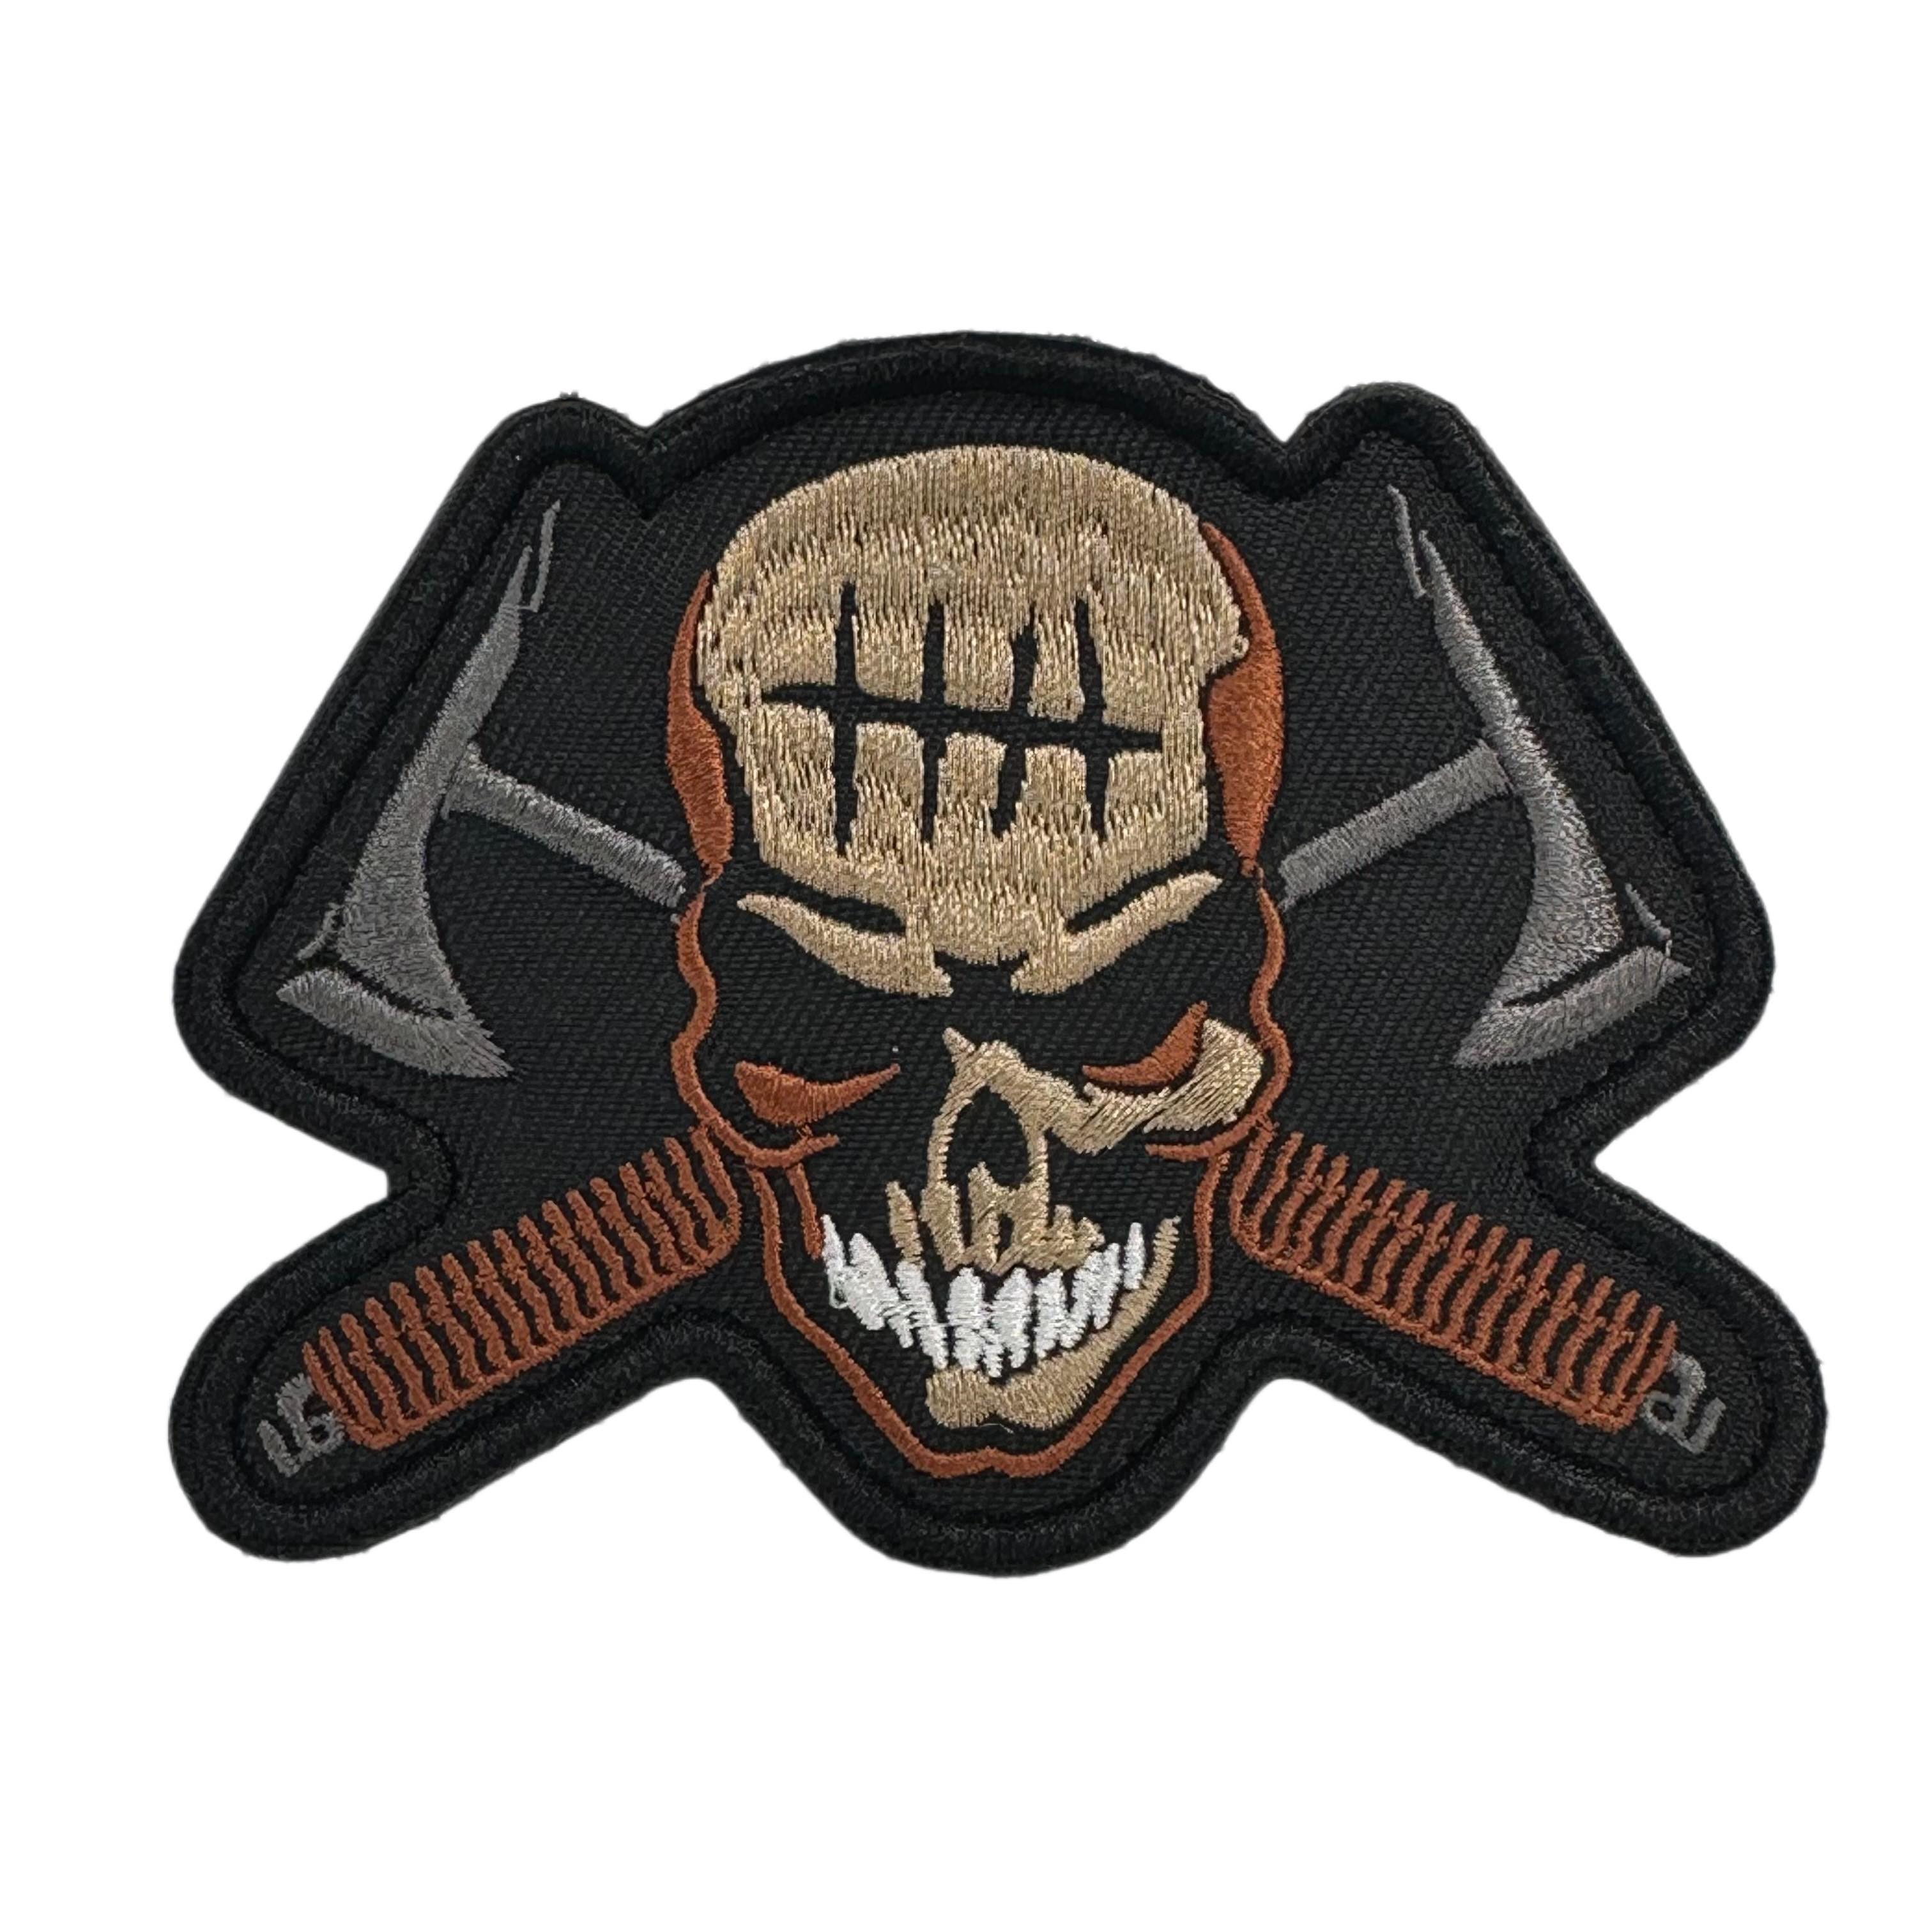 Embroidery Patch - Skull Axe Head